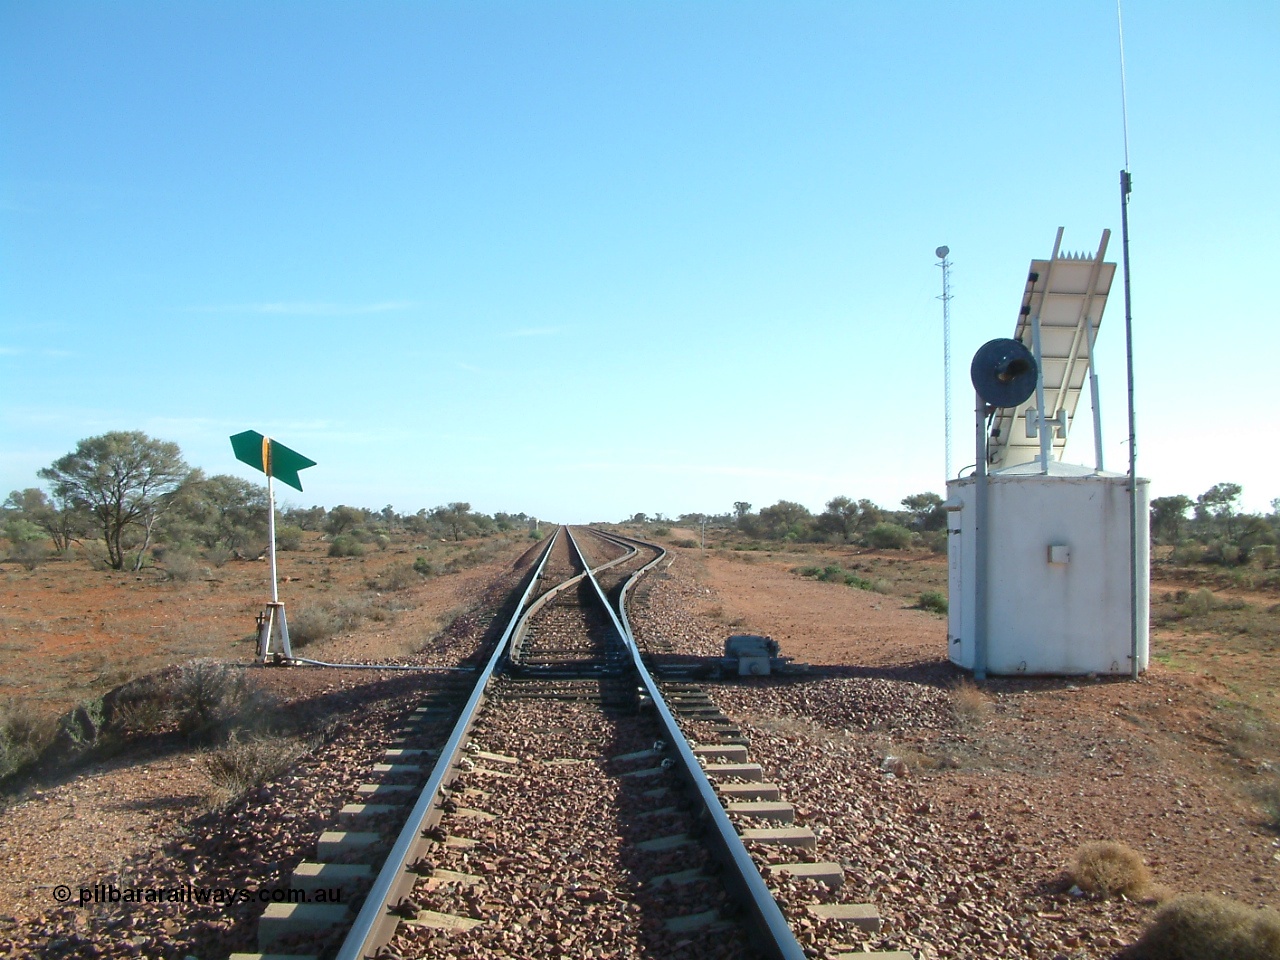 030416 083542
Carnes Siding located at the 566.4 km on the Central Australian line from Tarcoola to Alice Springs. View of the line and loop looking north from the south end with point indicator, interlocking hut and repeater signal and communications tower in the background. [url=https://goo.gl/maps/d5okP7KUhaCnCJaVA]GeoData location[/url]. 16th April 2003.
